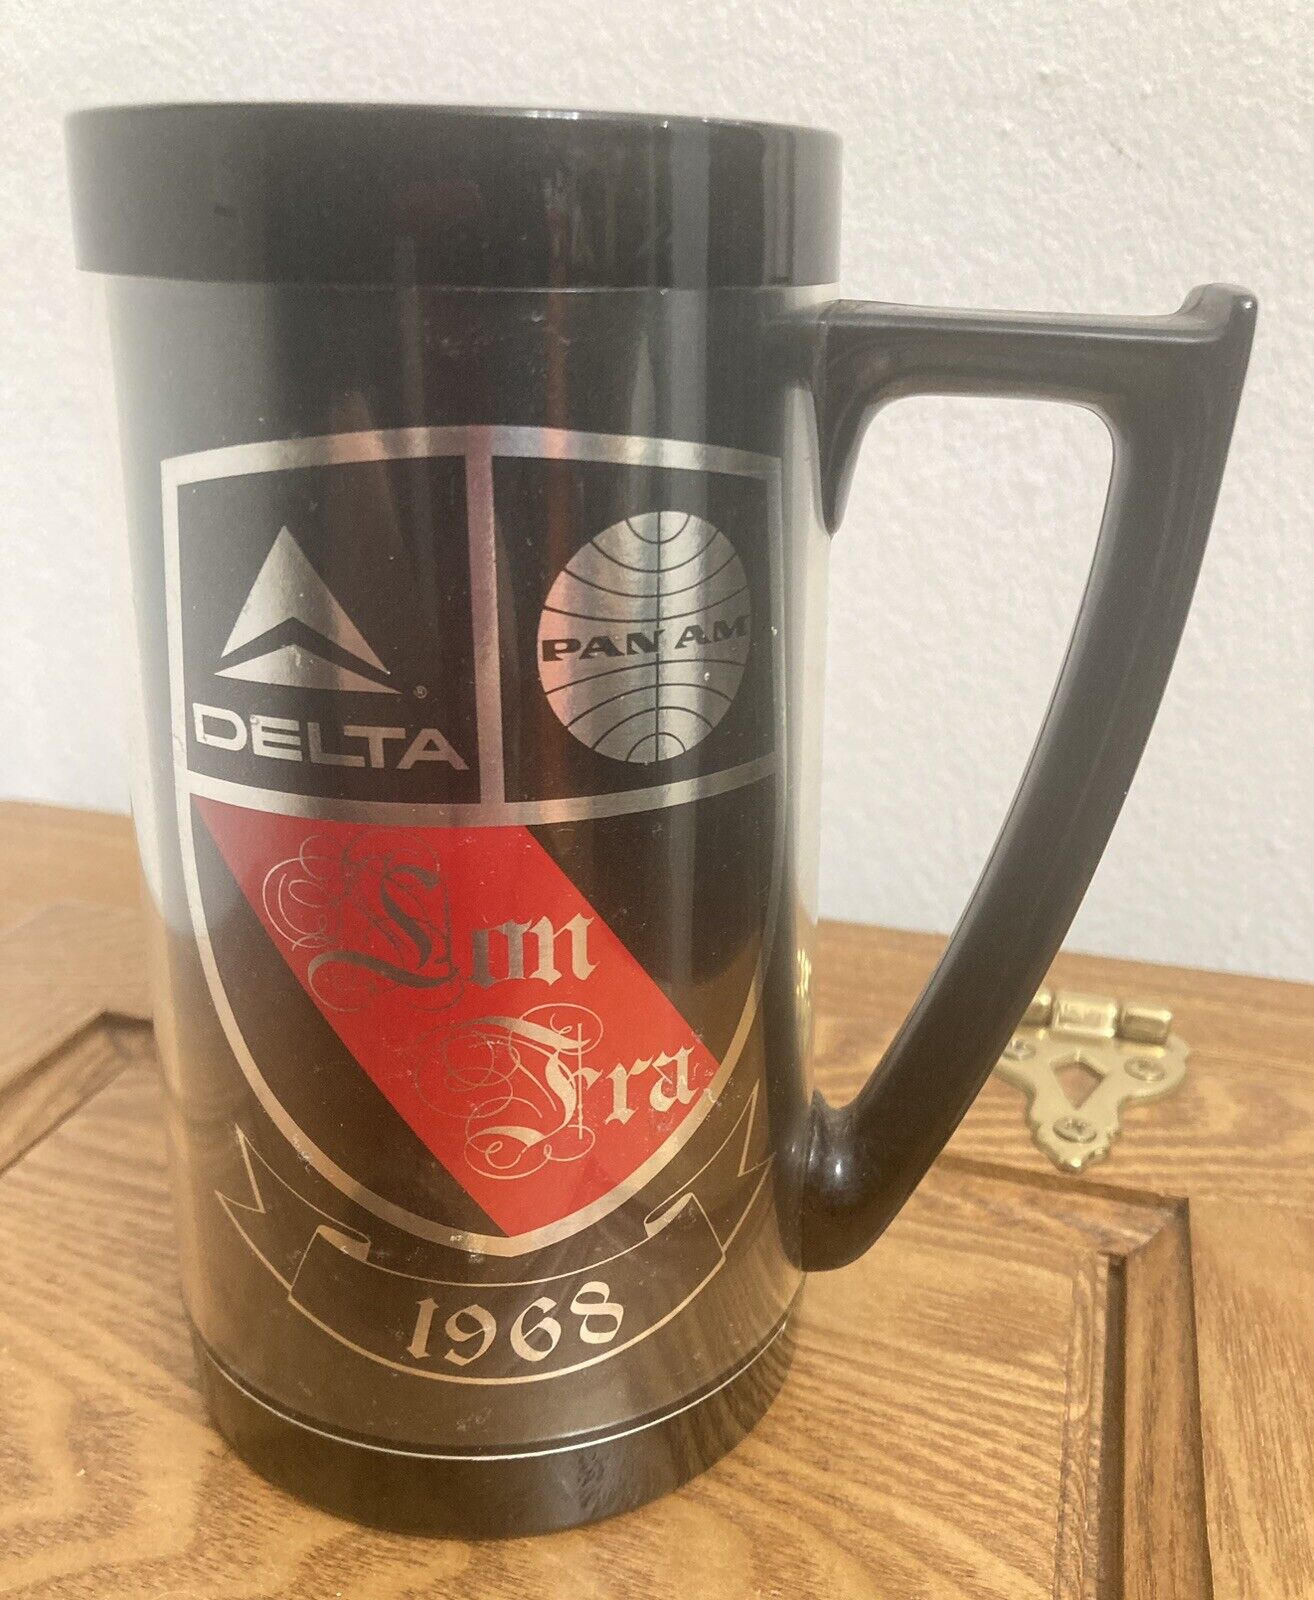 Vintage 1968 Delta Pan-Am Airlines West Bend Thermo Serv Cup Mug Stein